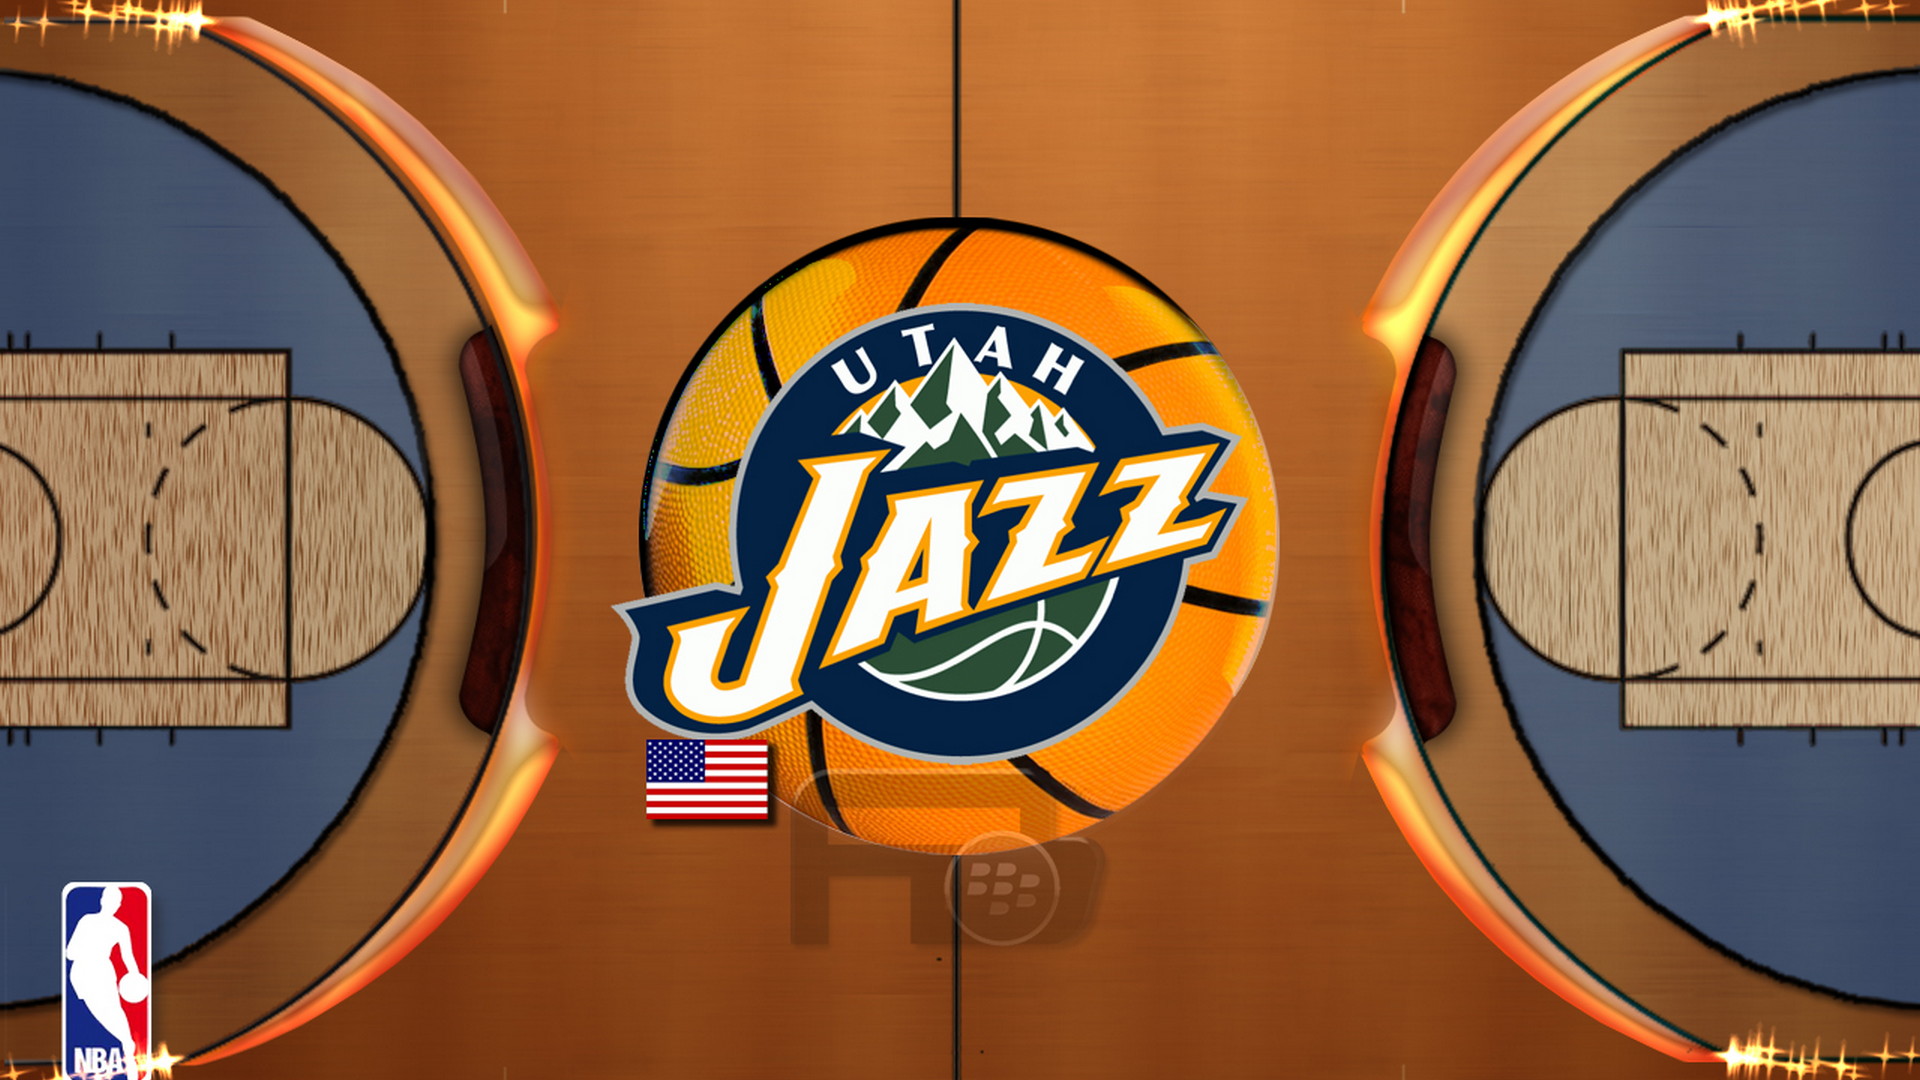 HD Desktop Wallpaper Utah Jazz With high-resolution 1920X1080 pixel. You can use this wallpaper for your Desktop Computer Backgrounds, Windows or Mac Screensavers, iPhone Lock screen, Tablet or Android and another Mobile Phone device